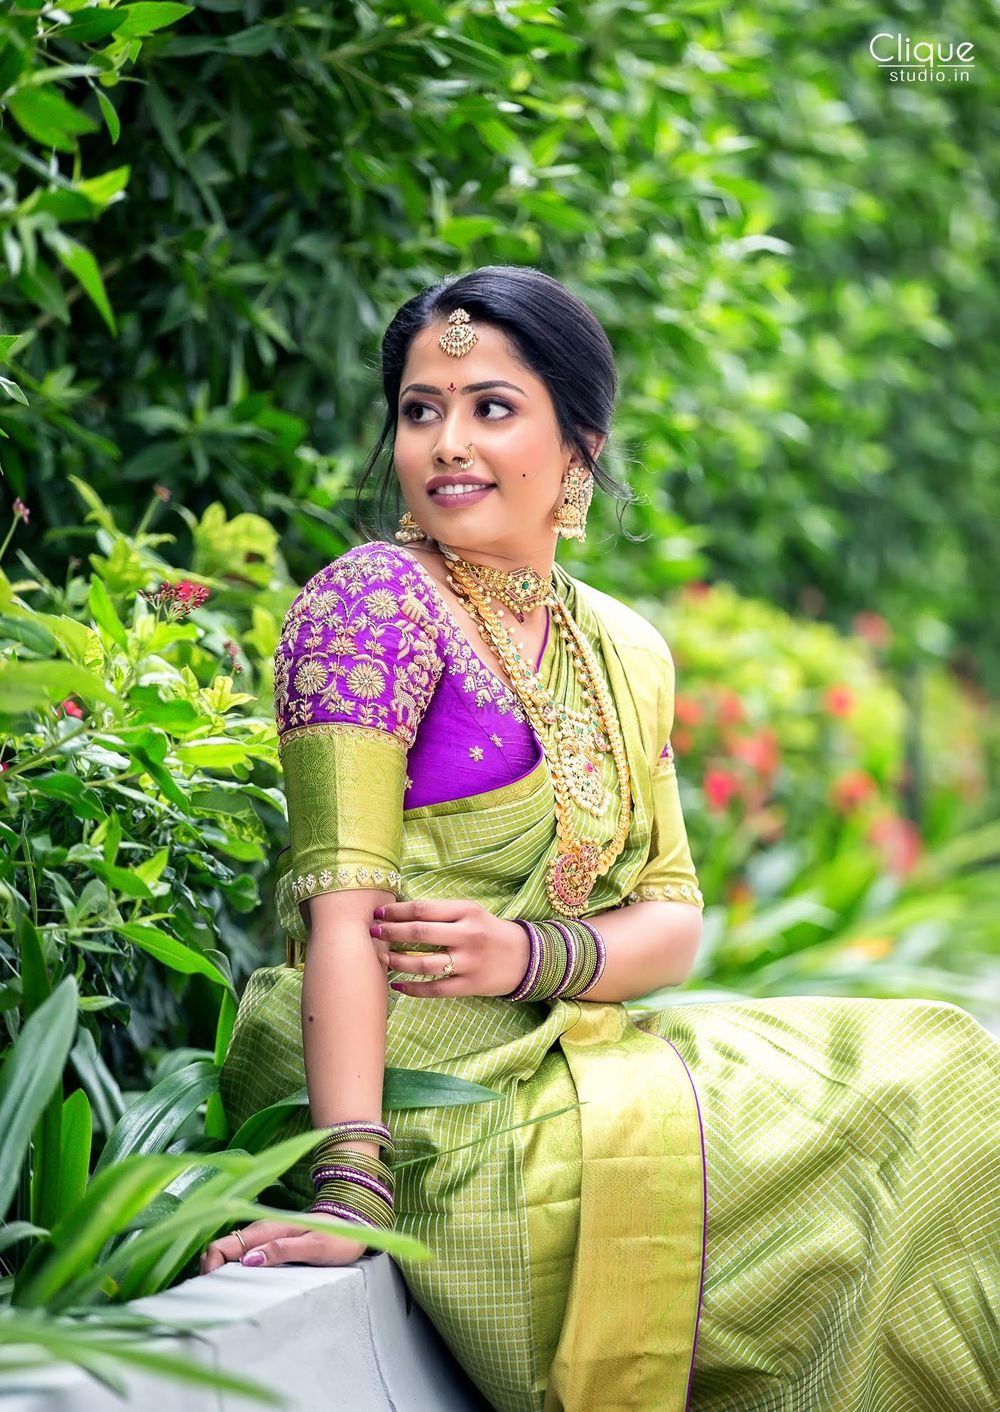 Photo of South Indian bride in a lime green saree with a  purple blouse.